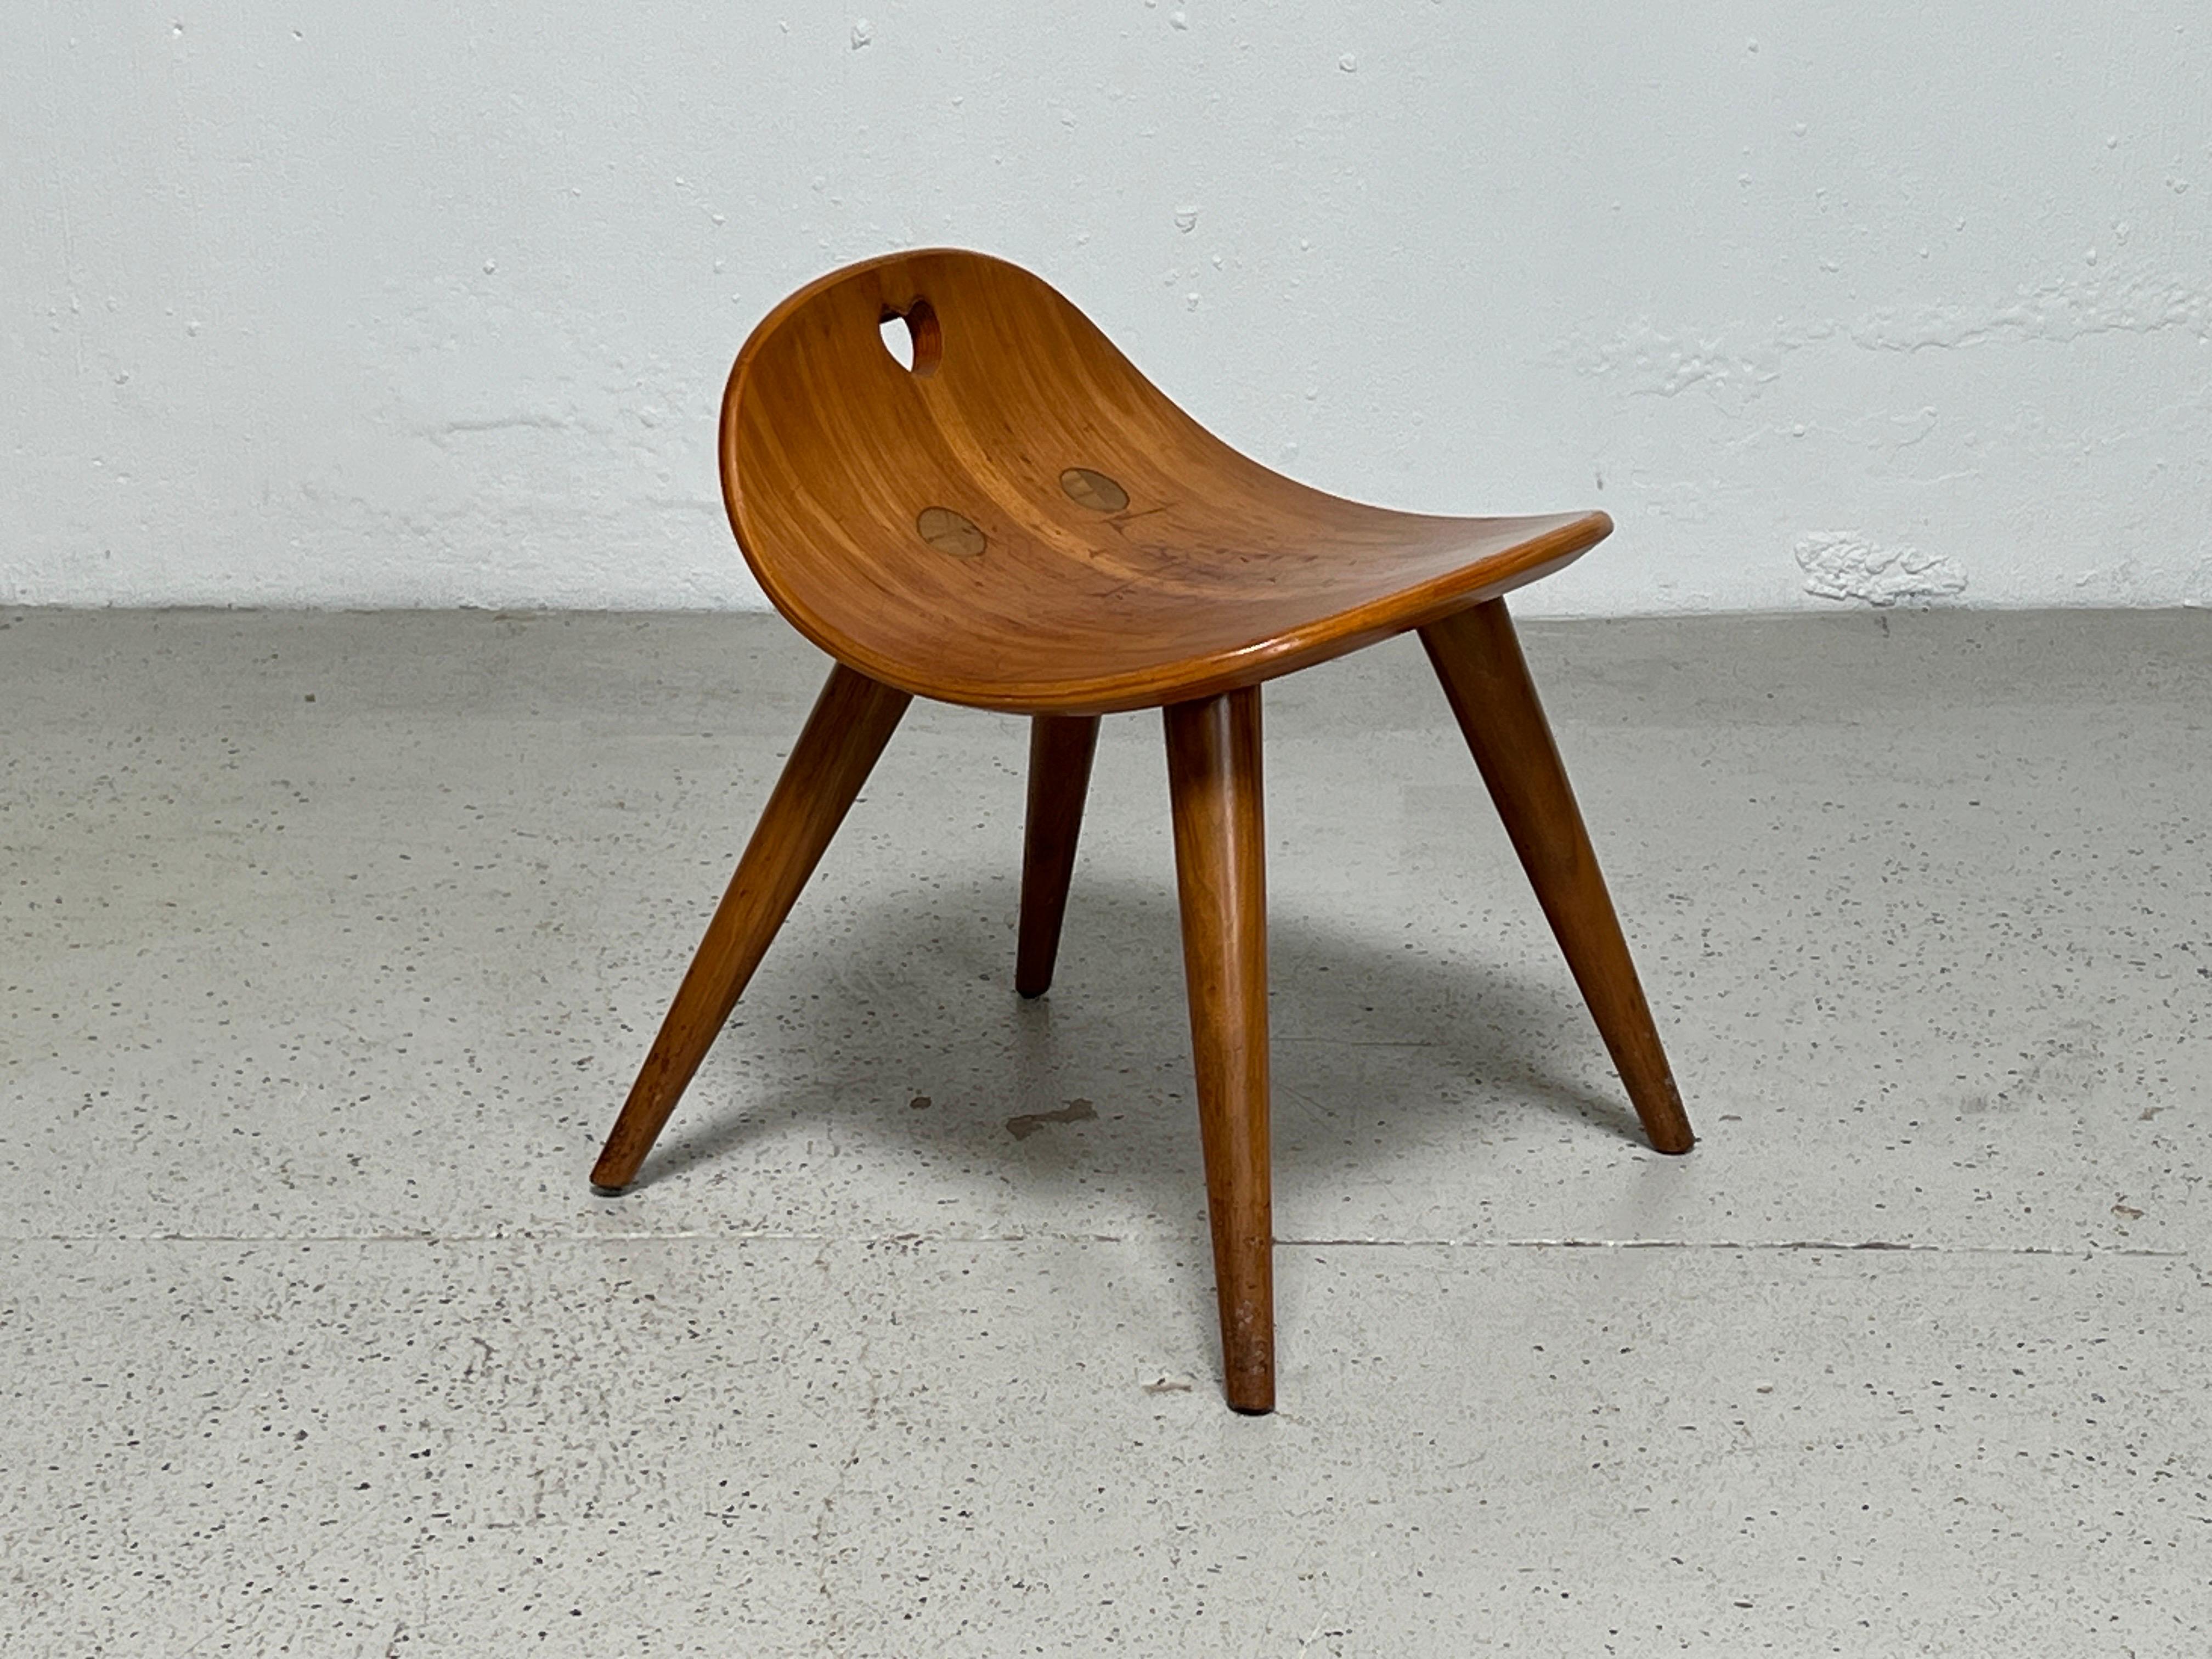 A rare and early heart stool designed by Edward Wormley for Dunbar.